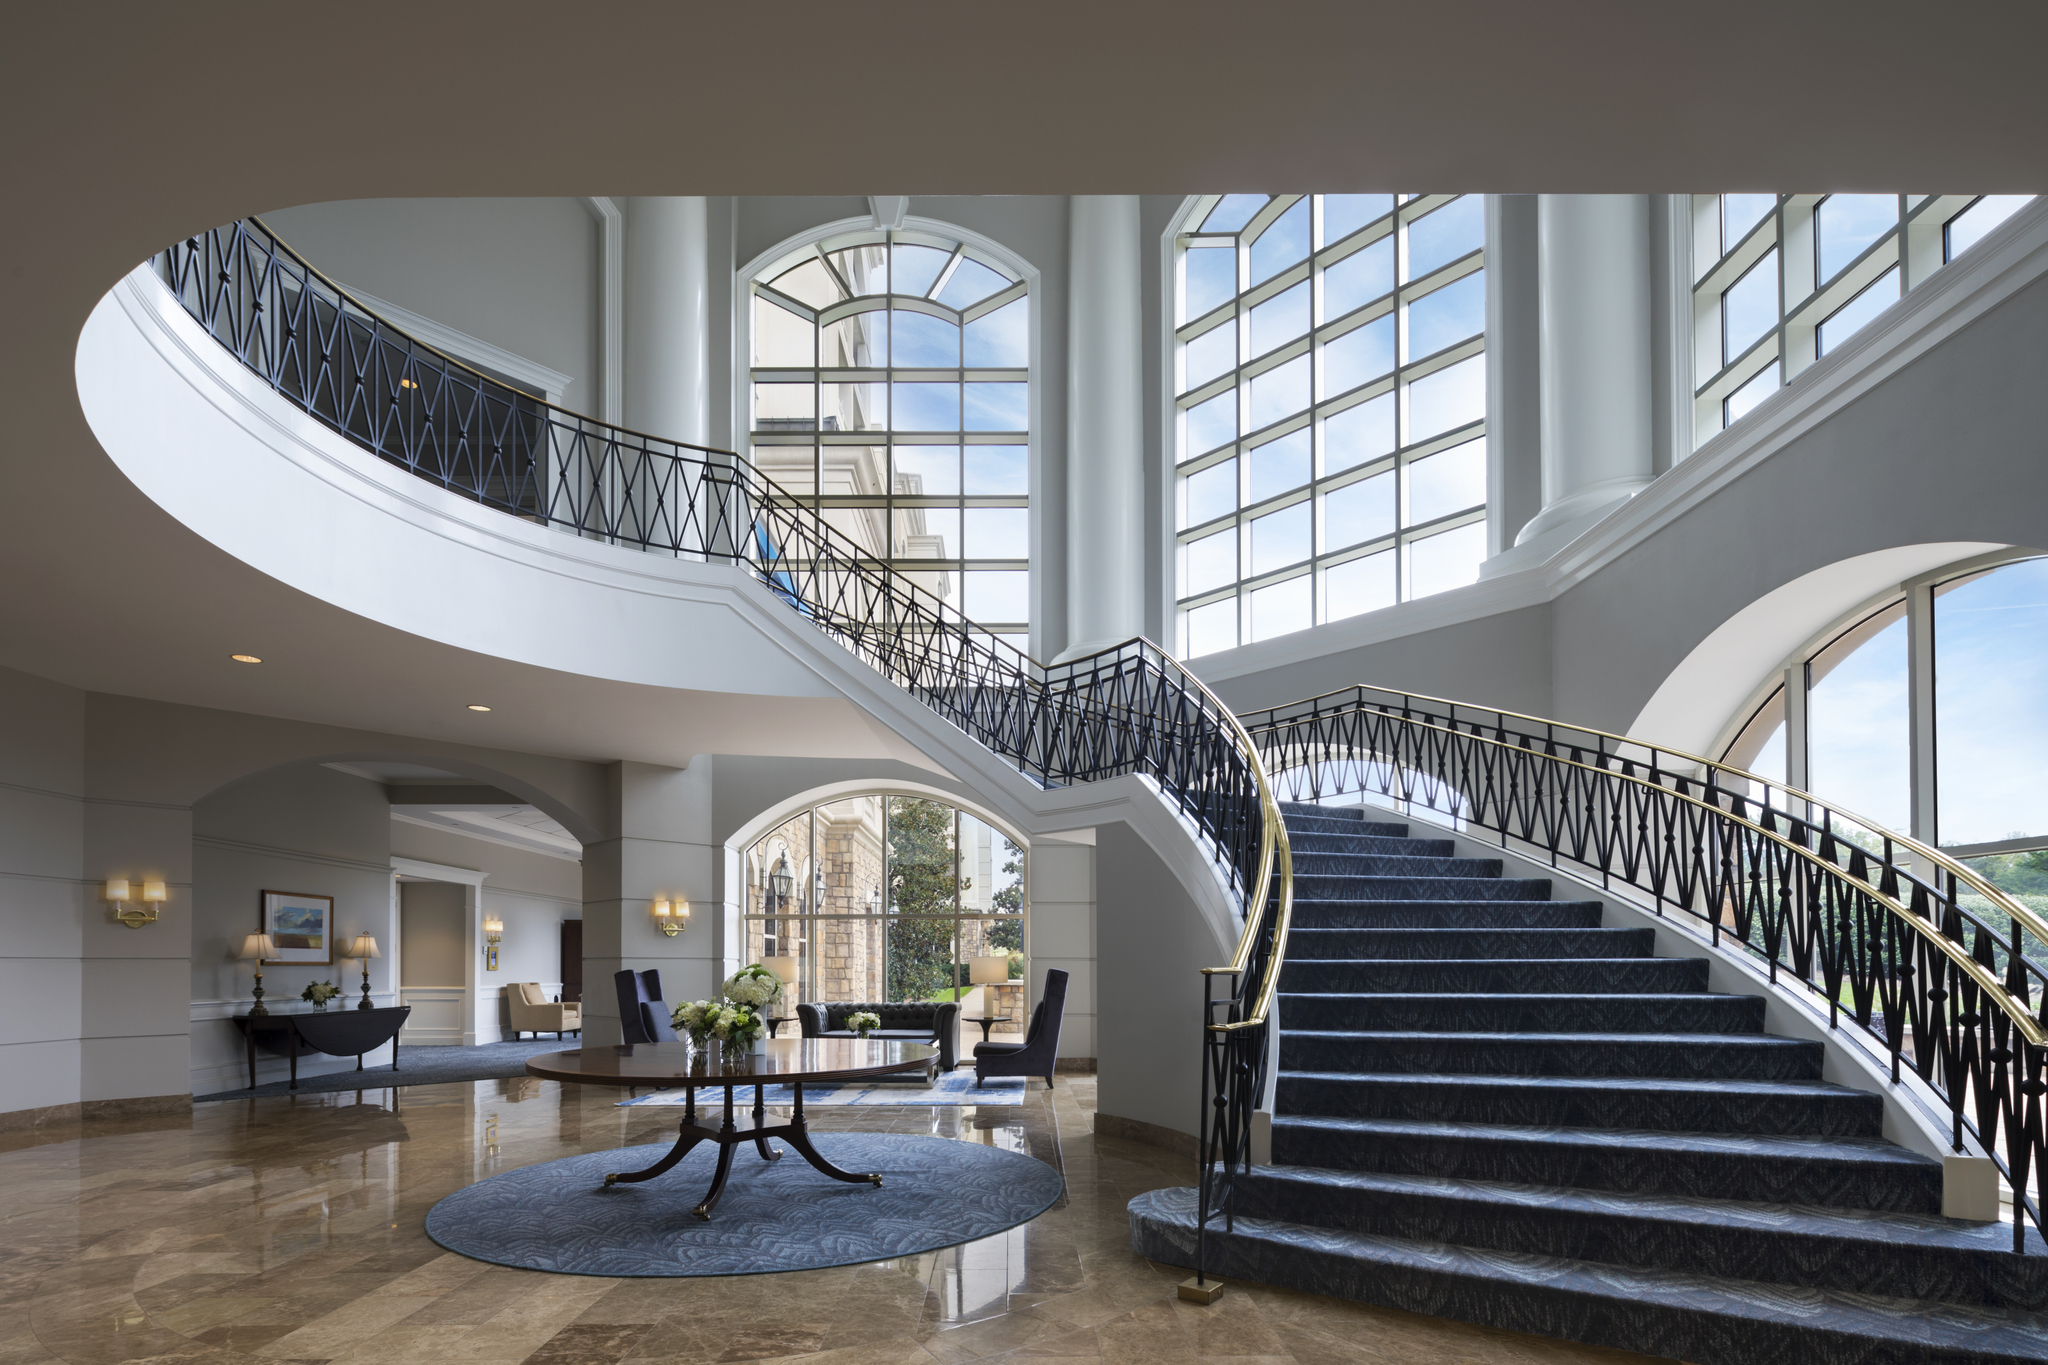 Renovated grand staircase at The Ballantyne Hotel